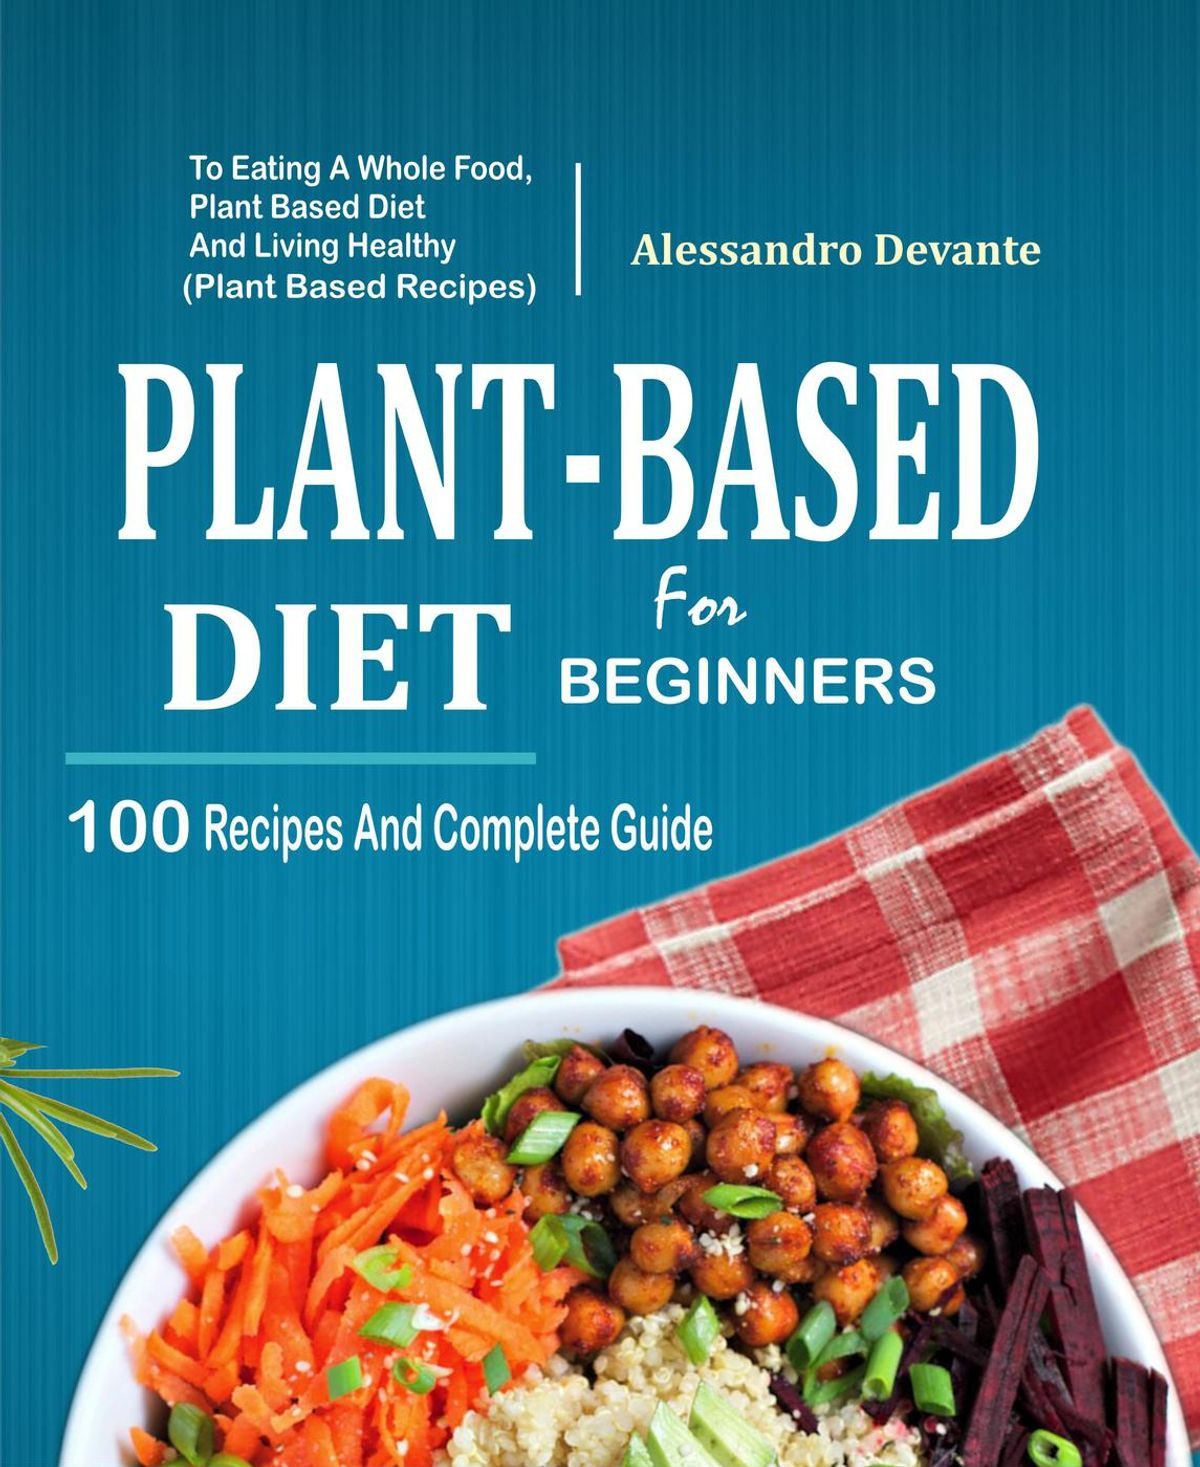 Plant Based Recipes For Beginners Kids
 Plant Based Diet For Beginners 100 Recipes And plete